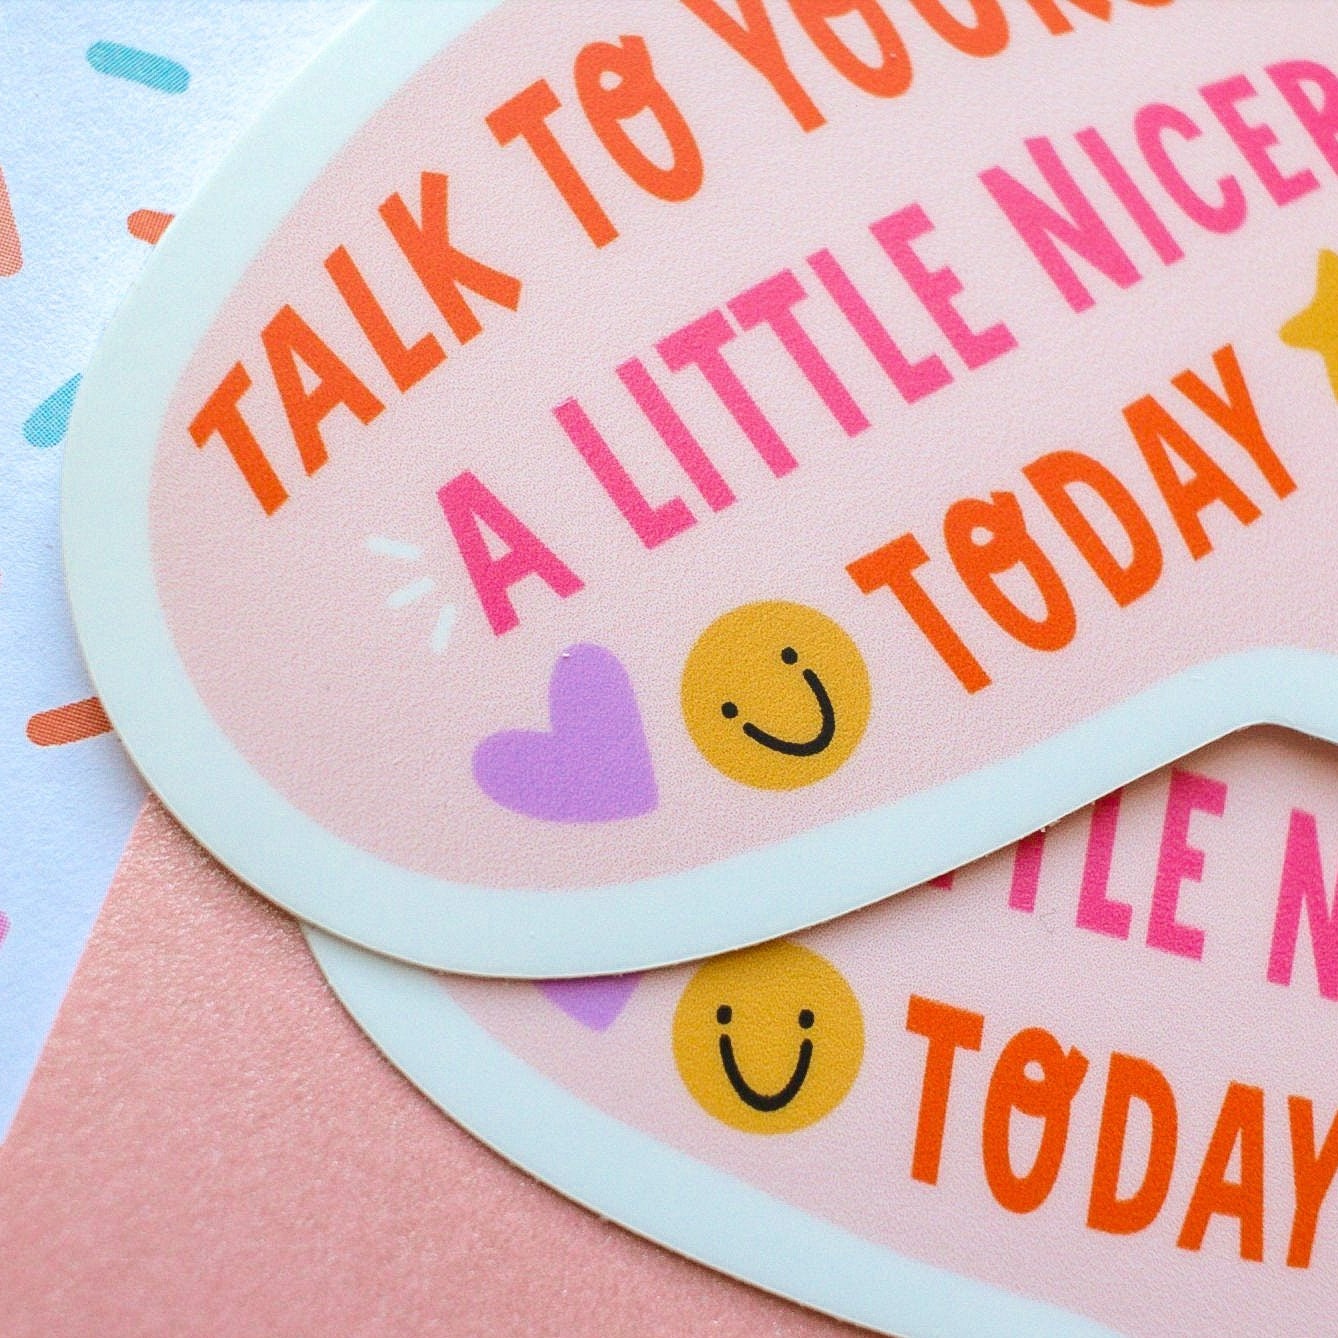 Talk to Yourself a Little Nicer Sticker